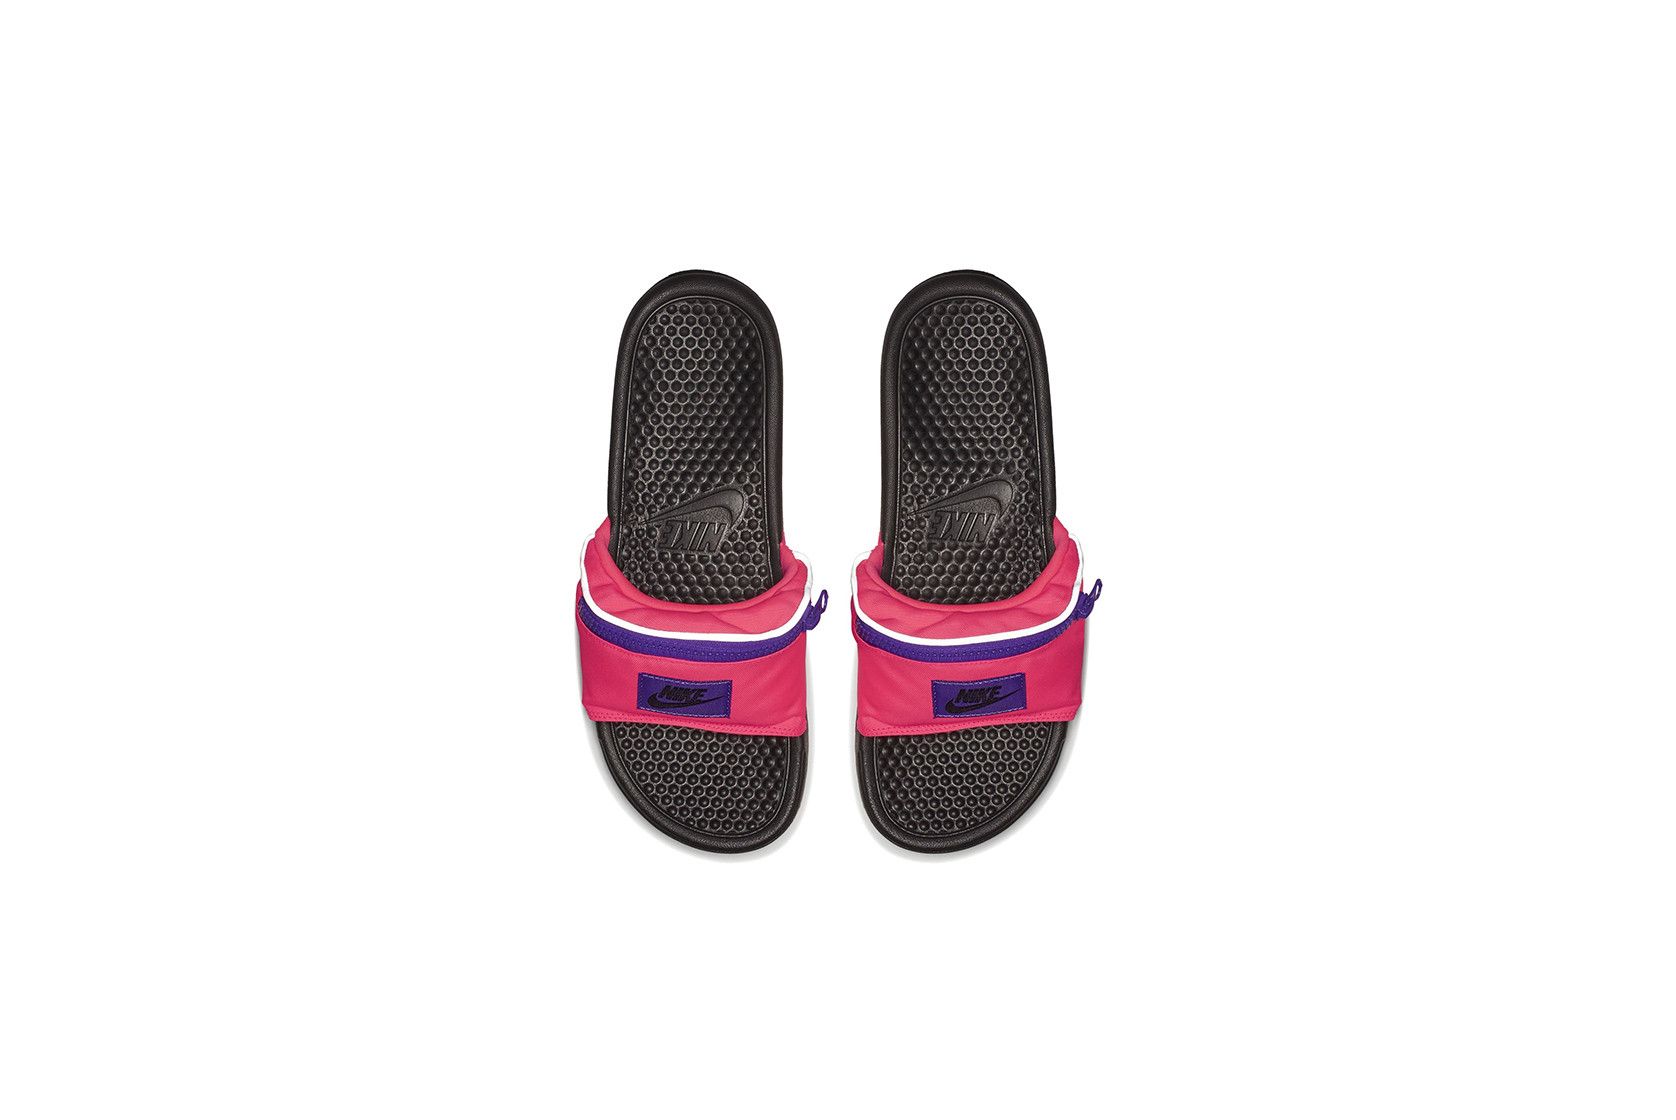 vermijden leerboek kassa Nike Is Releasing Fanny Pack Slides for the Summer and They're Amazing -  New Nike Shoes for Summer